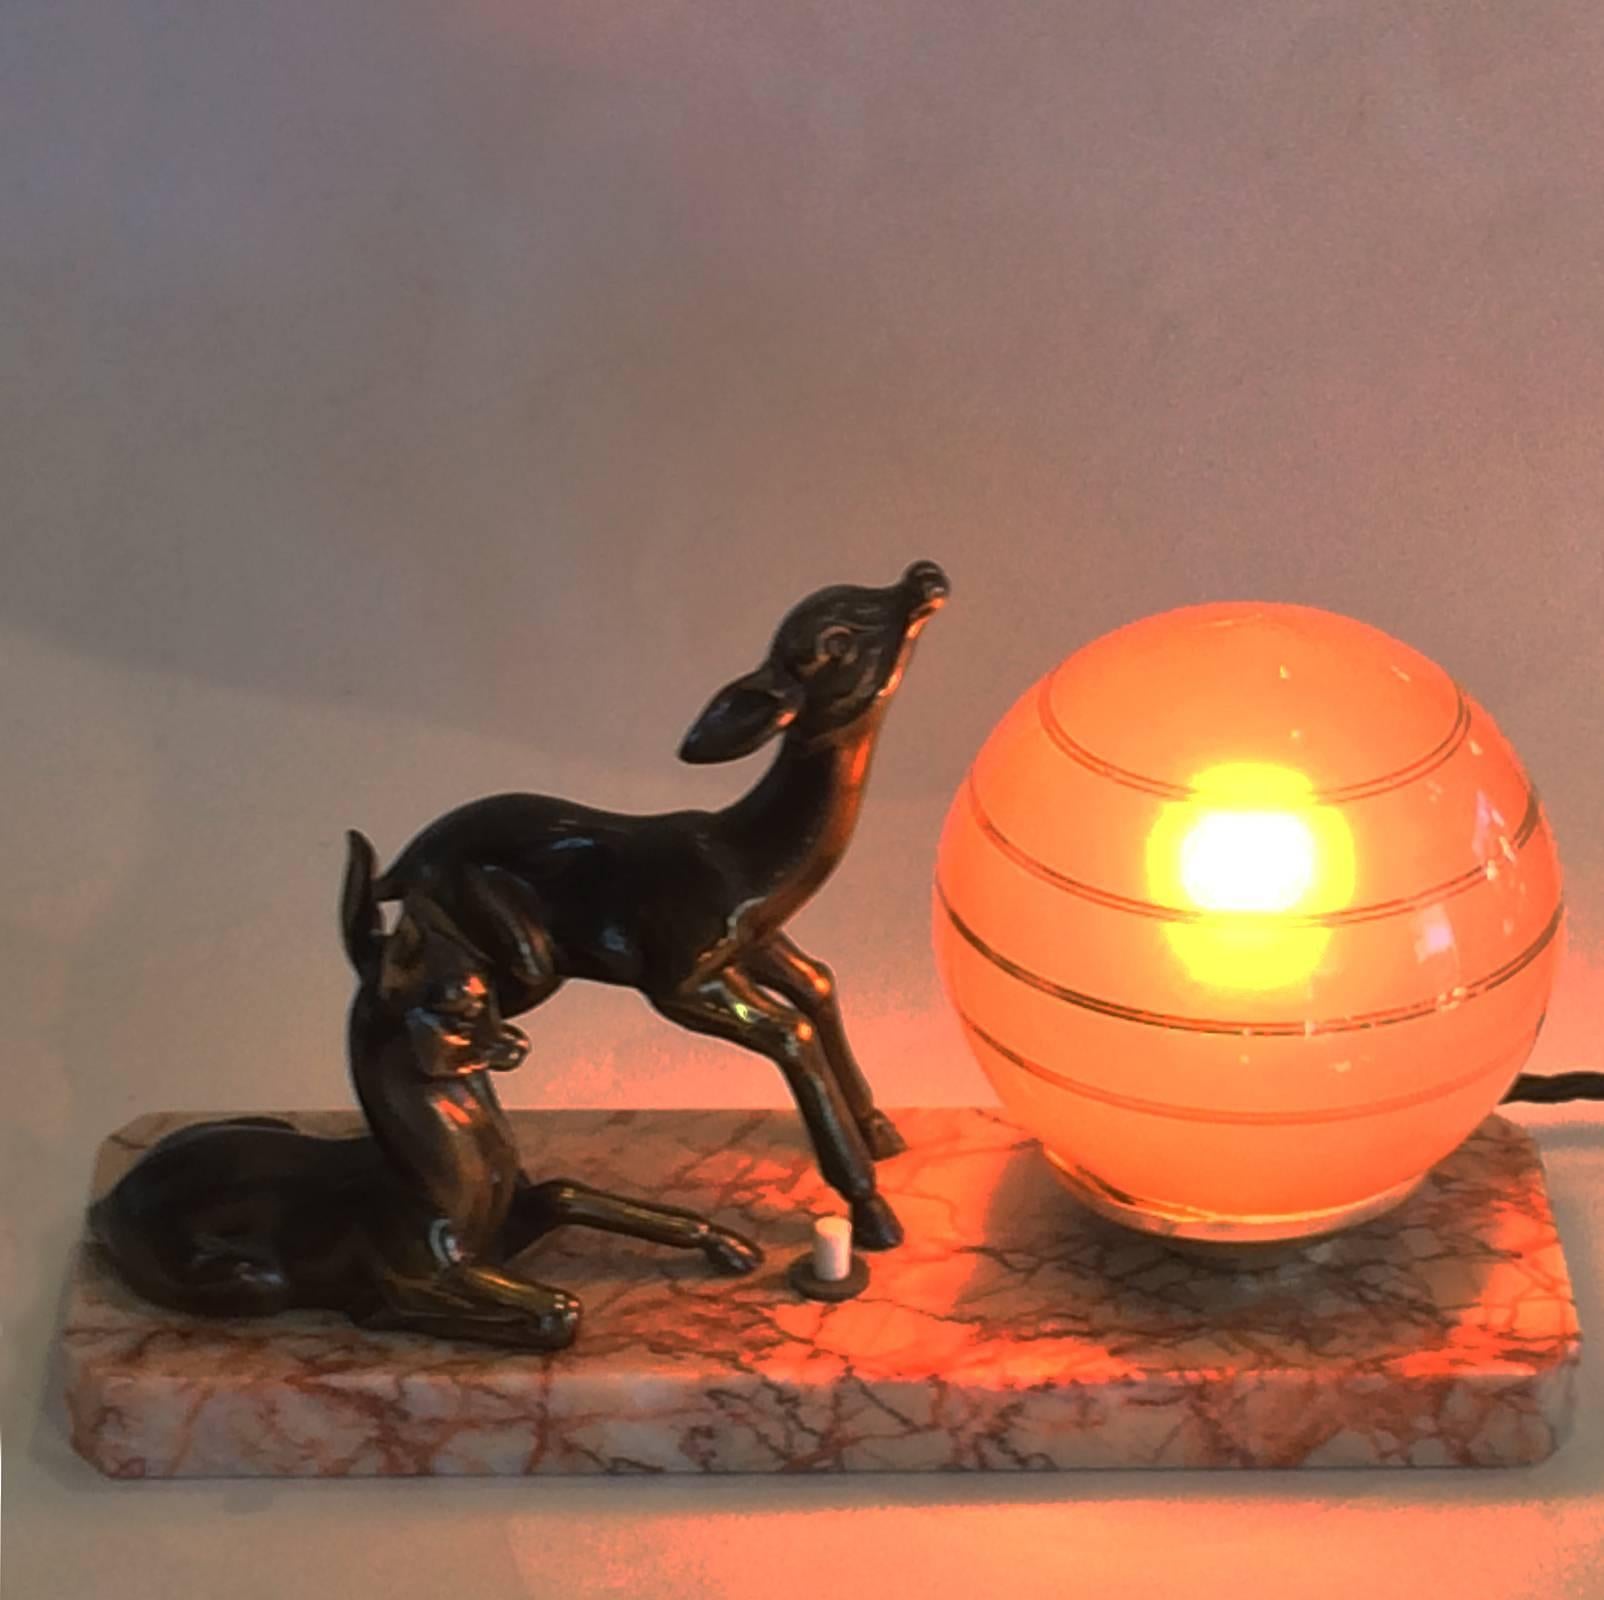 Art Deco French night light, featuring two deer fawns, Font De Art, bronze on white metal statues with Japanned finish (black enamel highlights to bronze). Still retaining original small, light pink glass shade, satin interior, with perfect outer